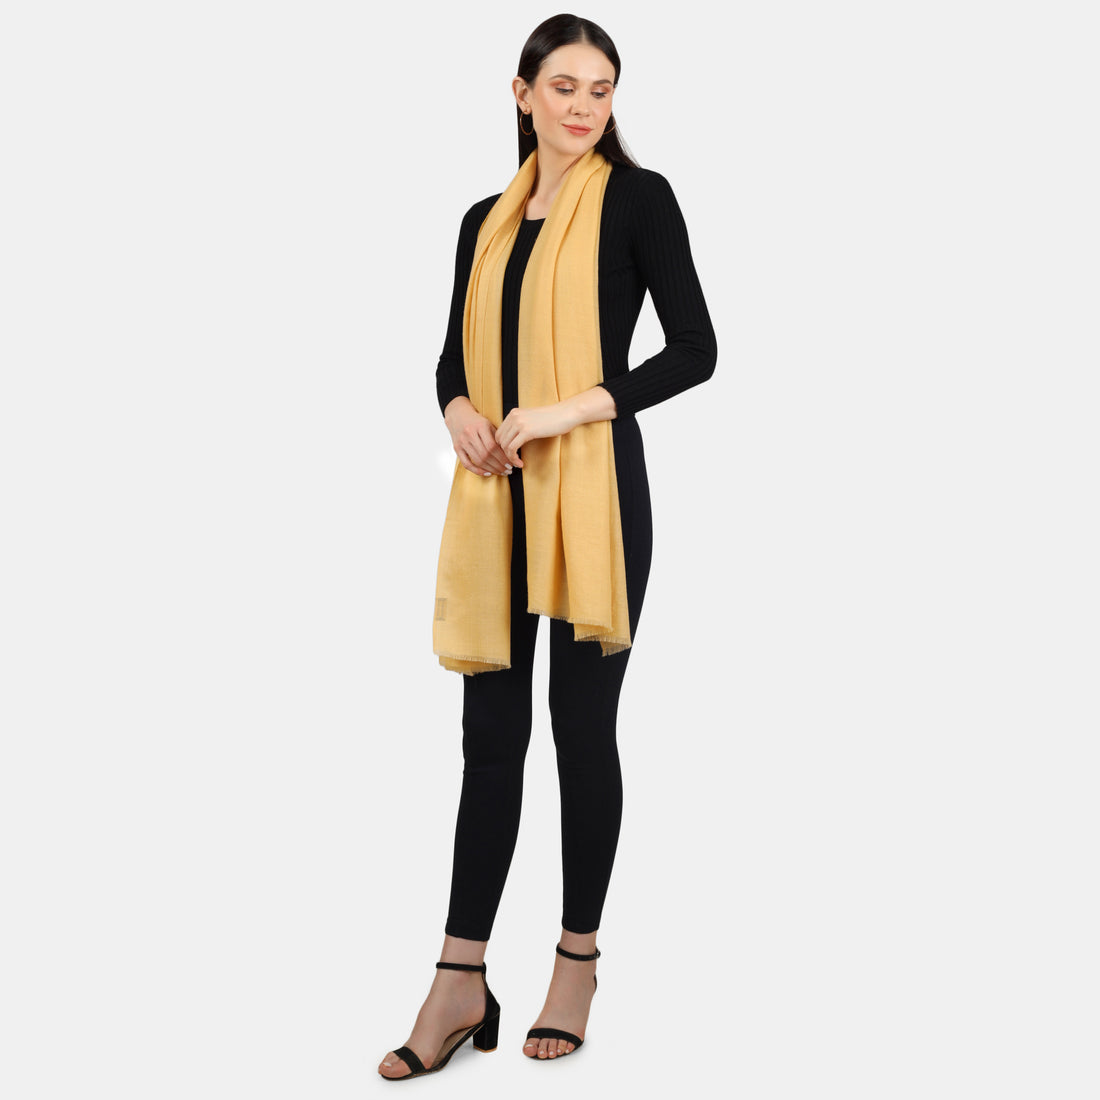 Is Cashmere scarf soft?